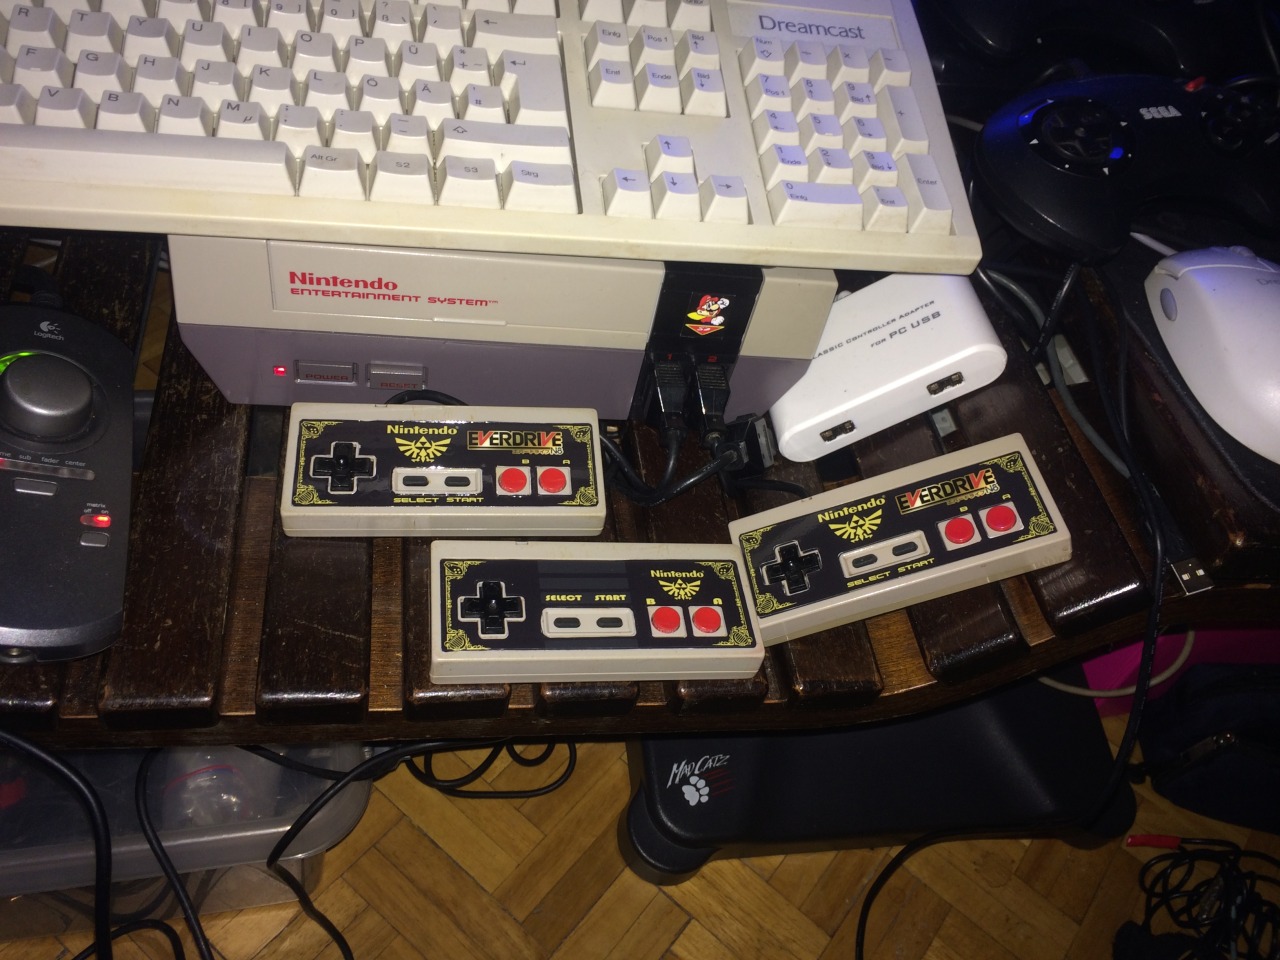 Buy Cheap Nes controllers without stickers, clean them out, and then stick on the new pimp’d stickers :-D